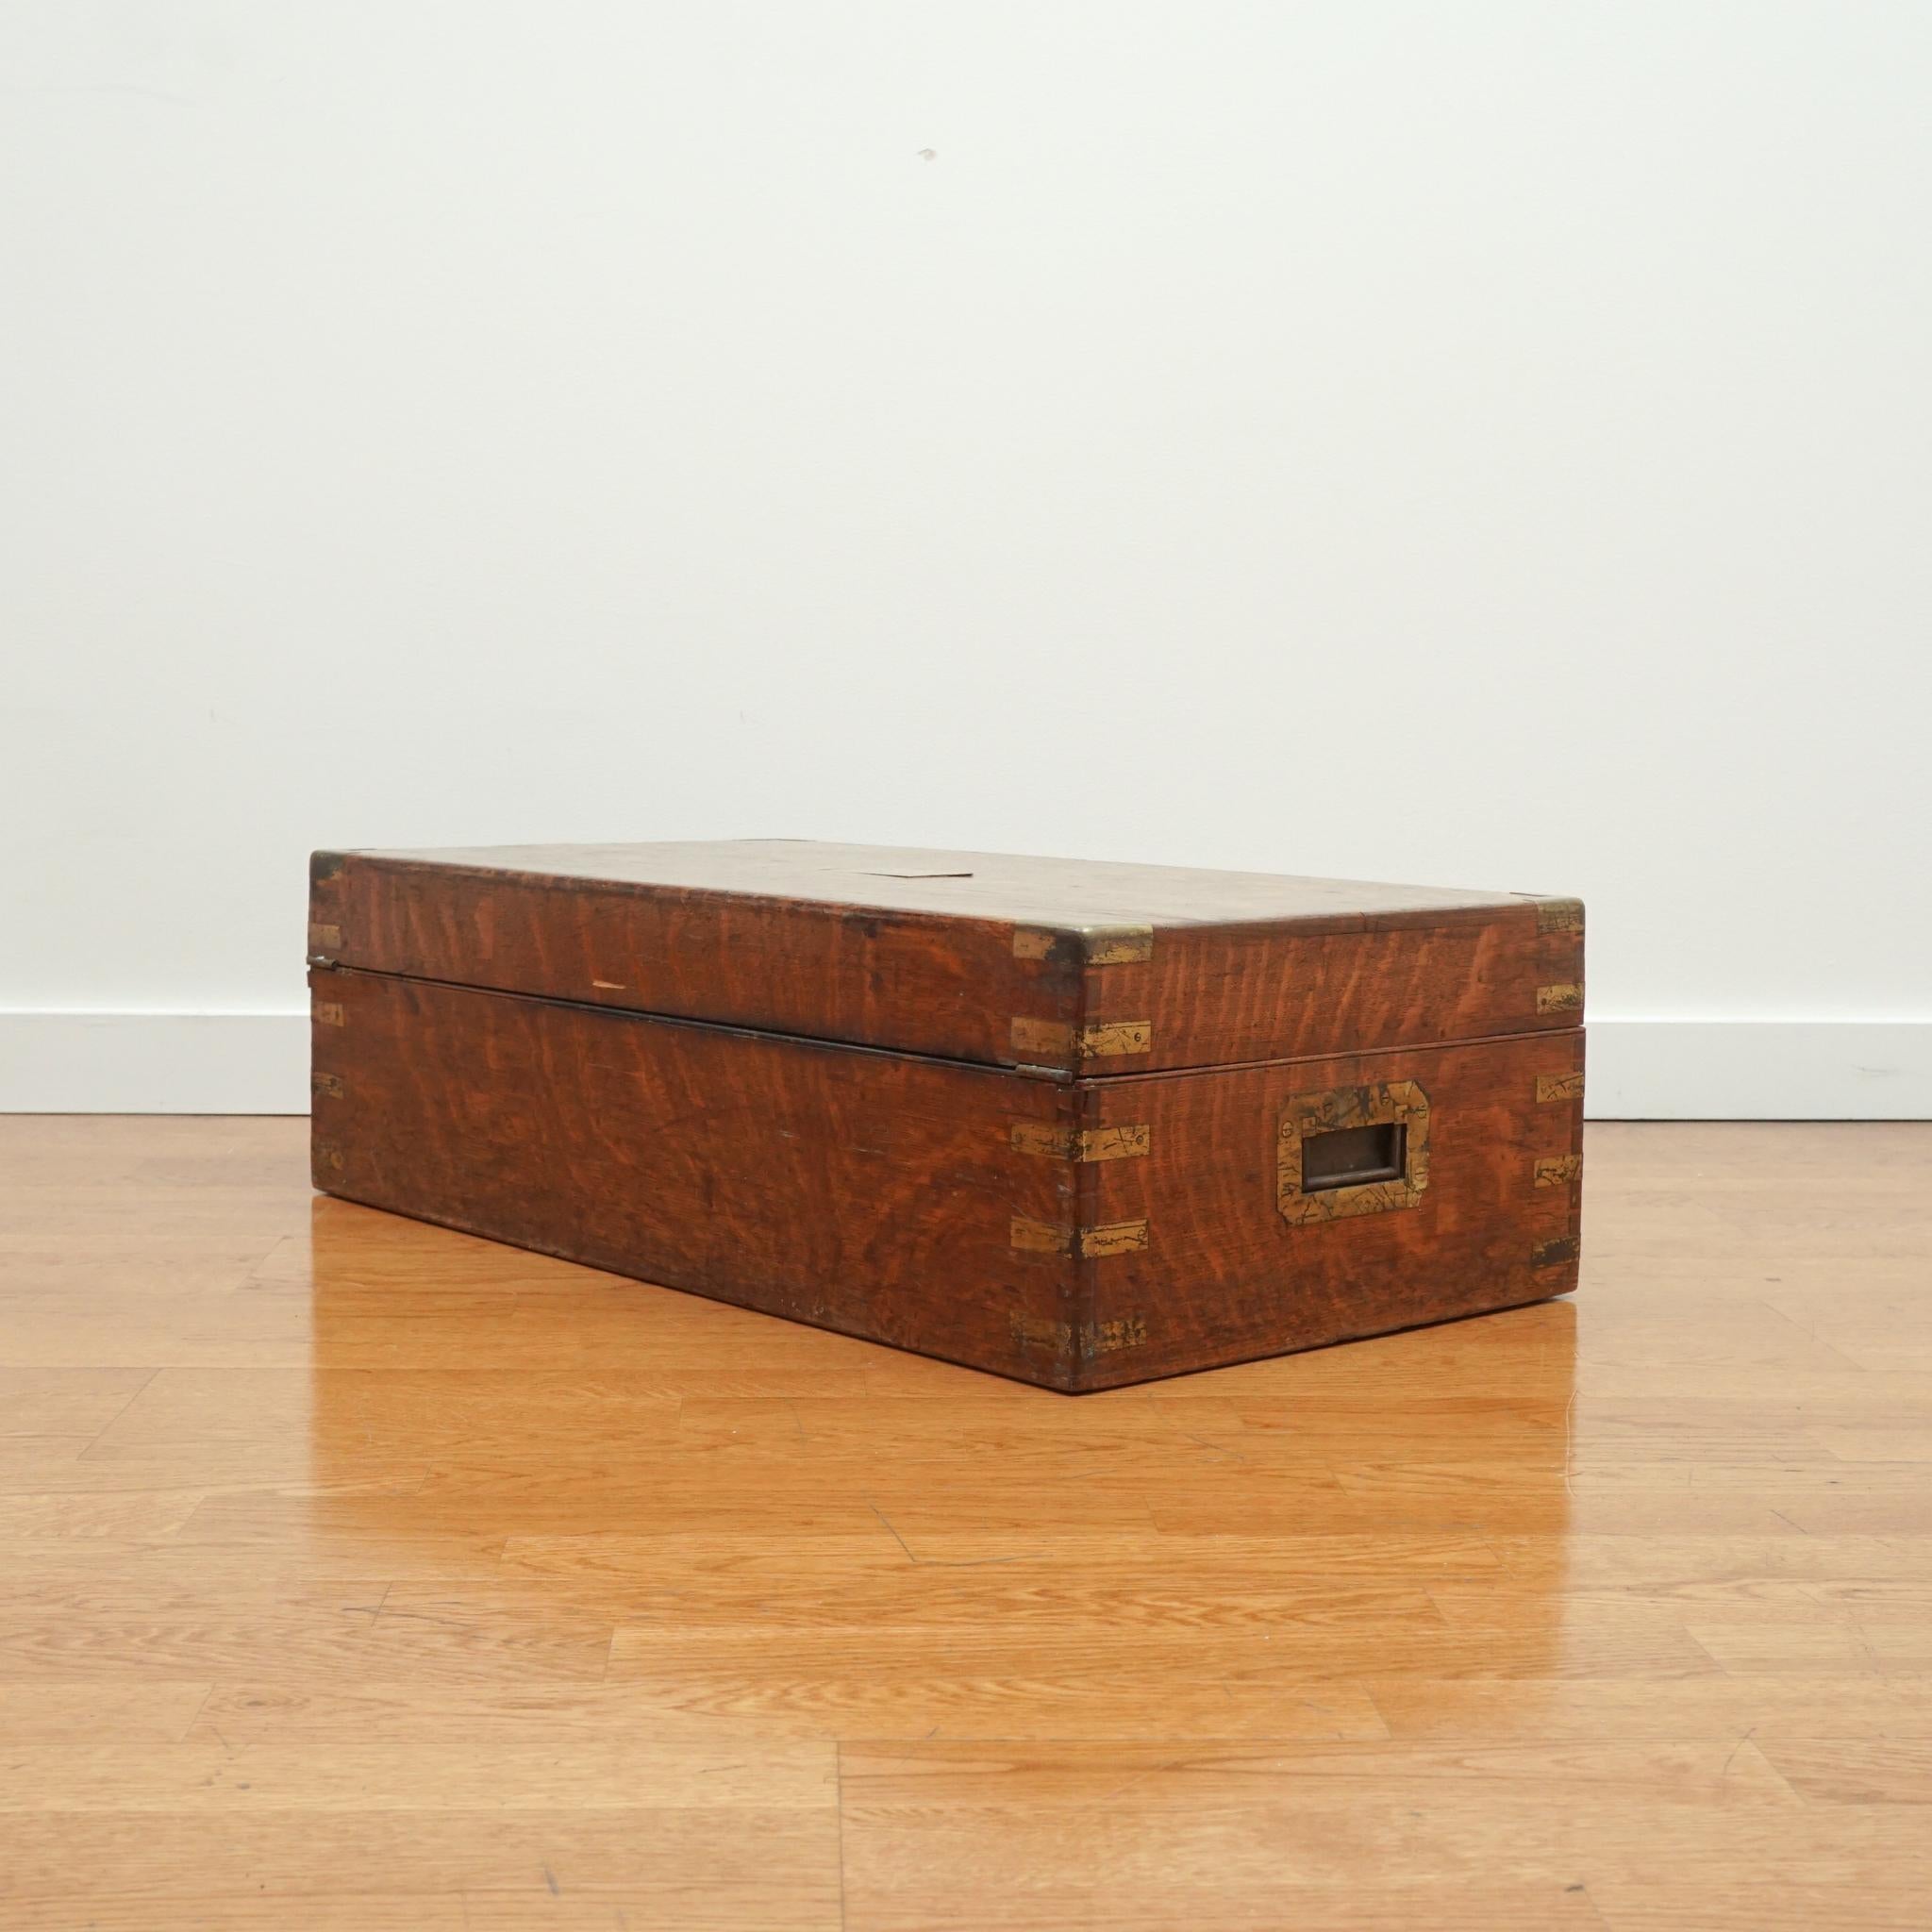 The antique oak storage box, shown here, is as decorative as it is practical.  Made in the 1840s-1850s, the box is solidly crafted of oak and fitted with brass corner braces and corner guards, and an unmarked brass center plate.  The interior offers